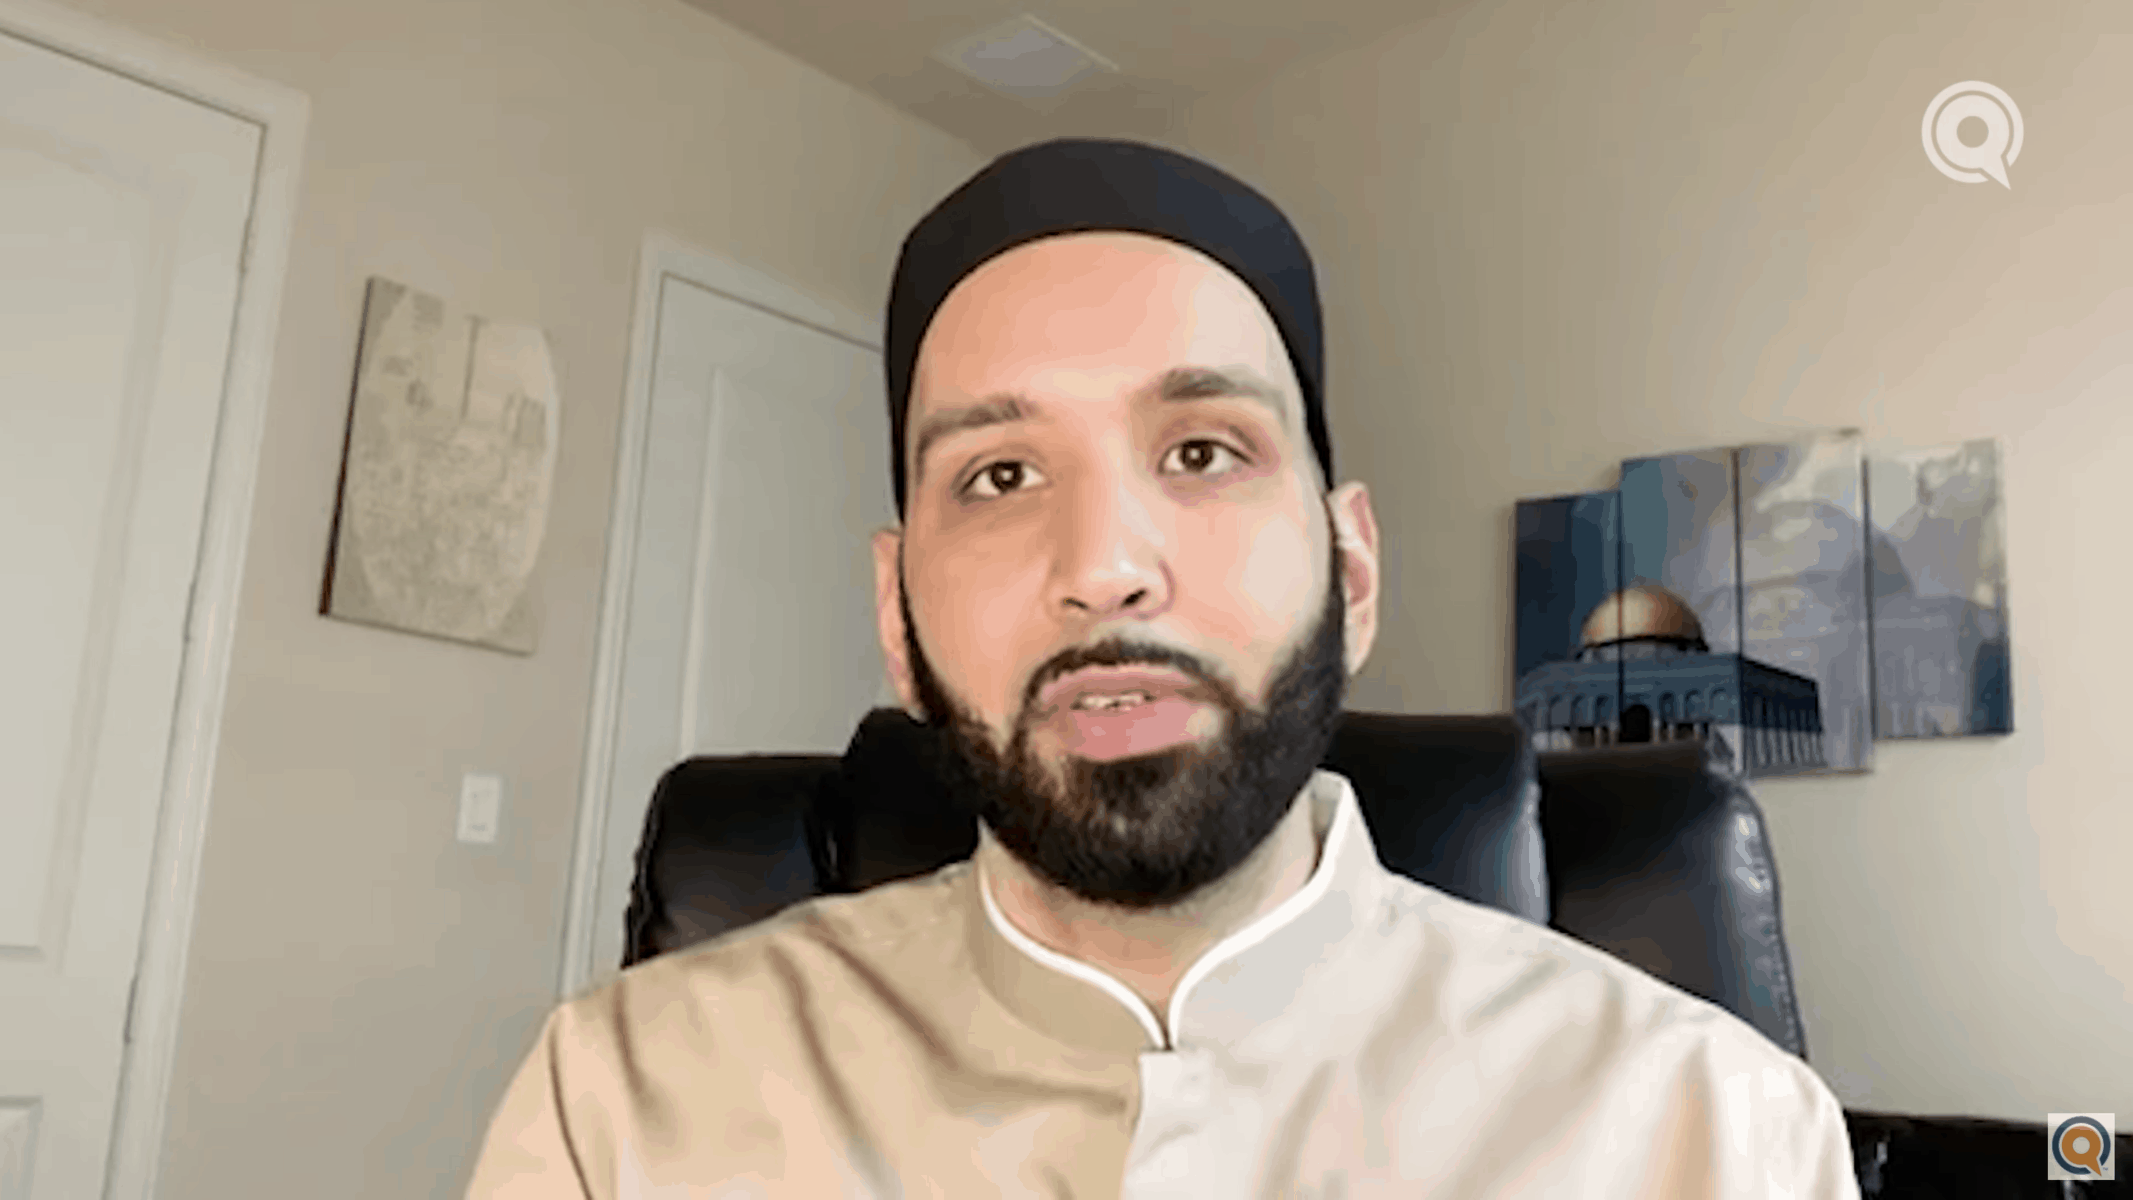 Omar Suleiman – What if I Fail? Delaying Commitment Due to Self-Doubt